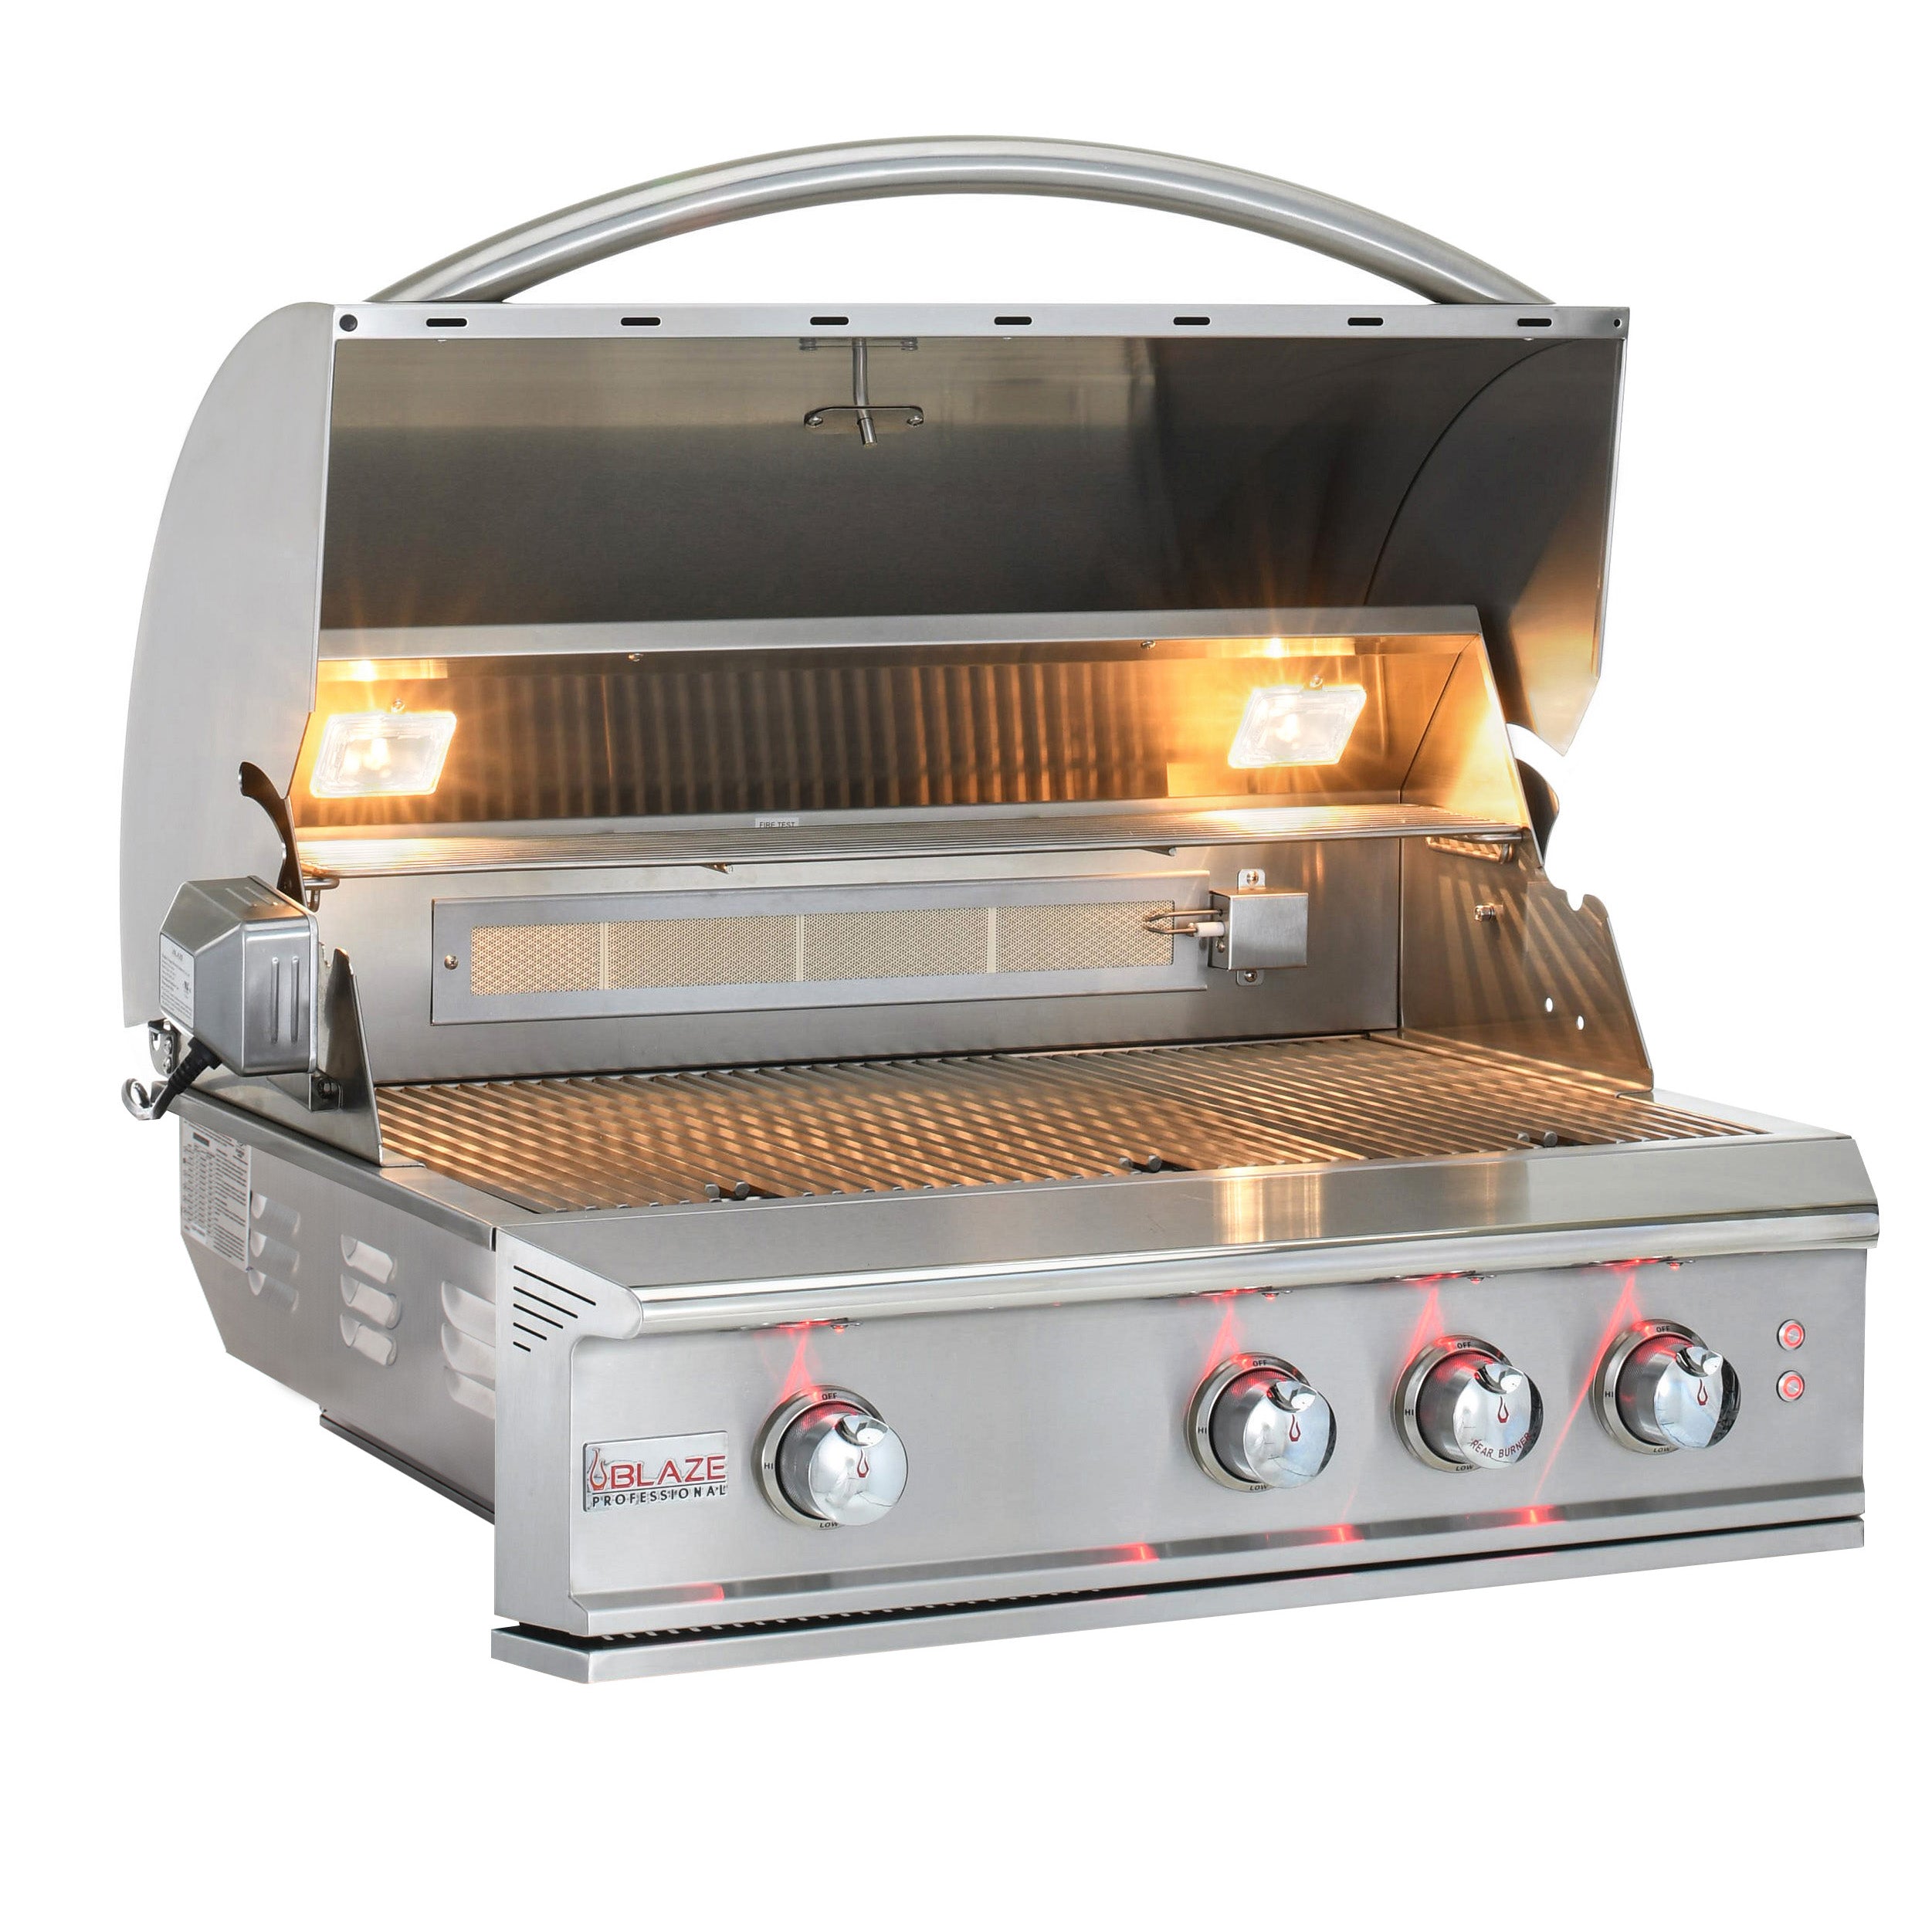 Blaze Professional LUX 34 inch 3 Burner Gas Grill with Rear Infrared Burner BLZ-3PRO